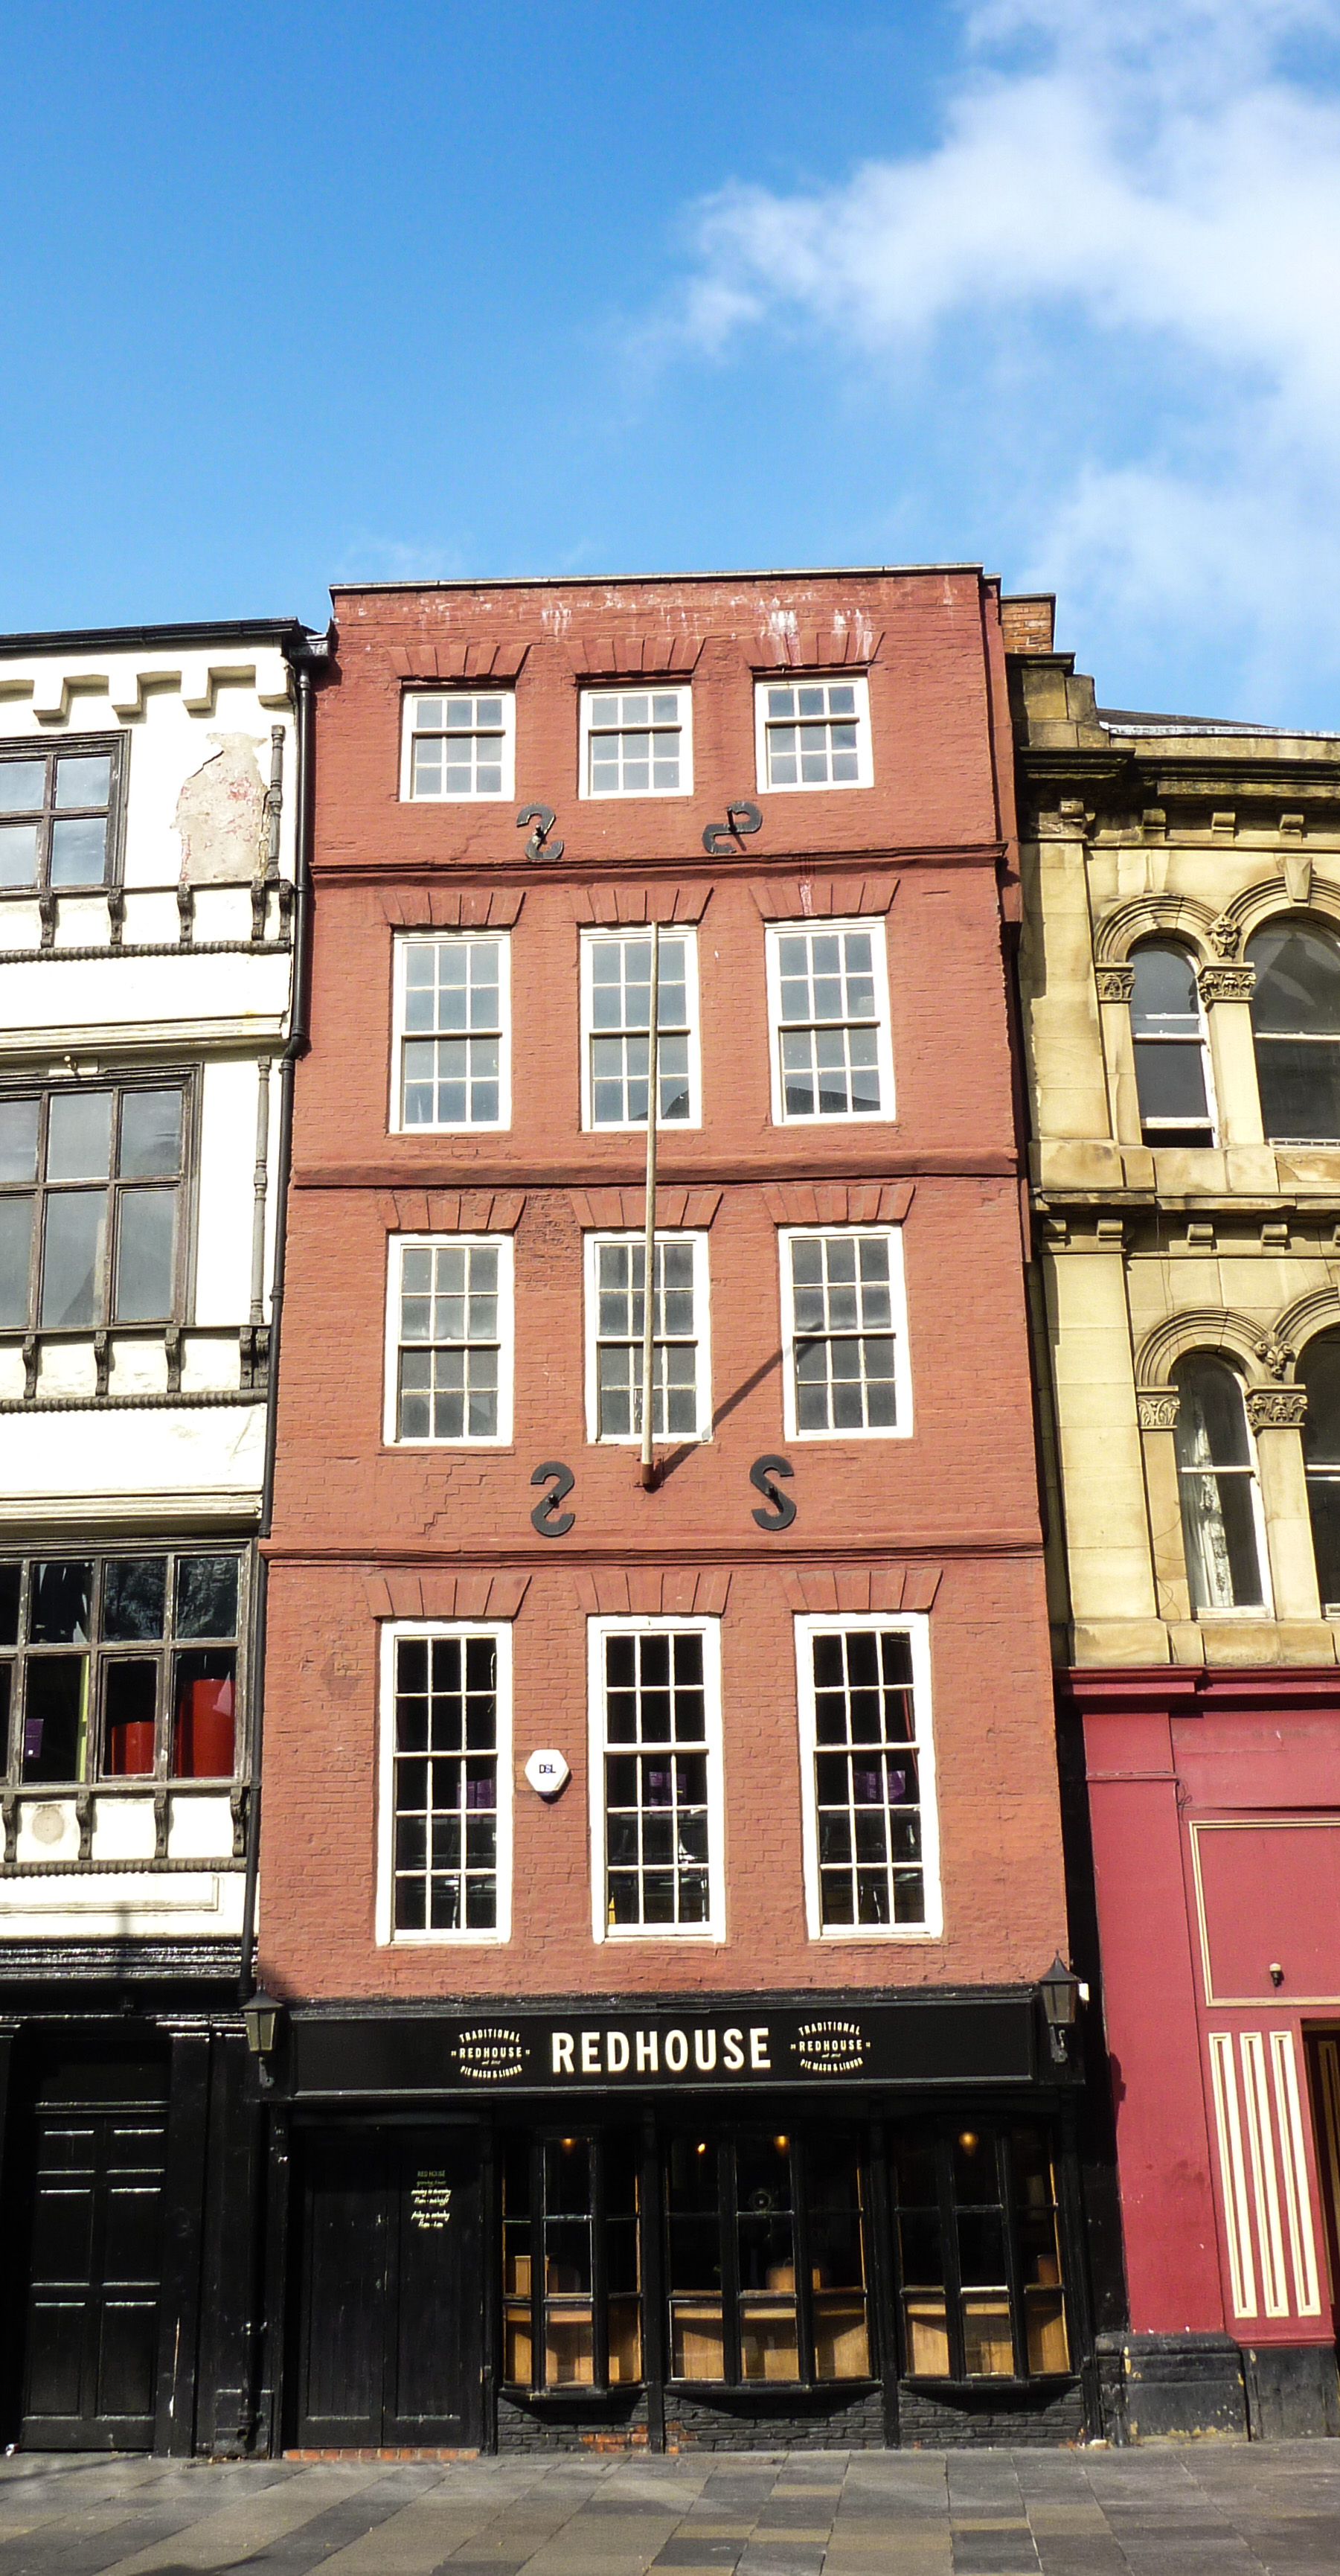 A square of view of the front of the Redhouse pub in Newcastle, UK